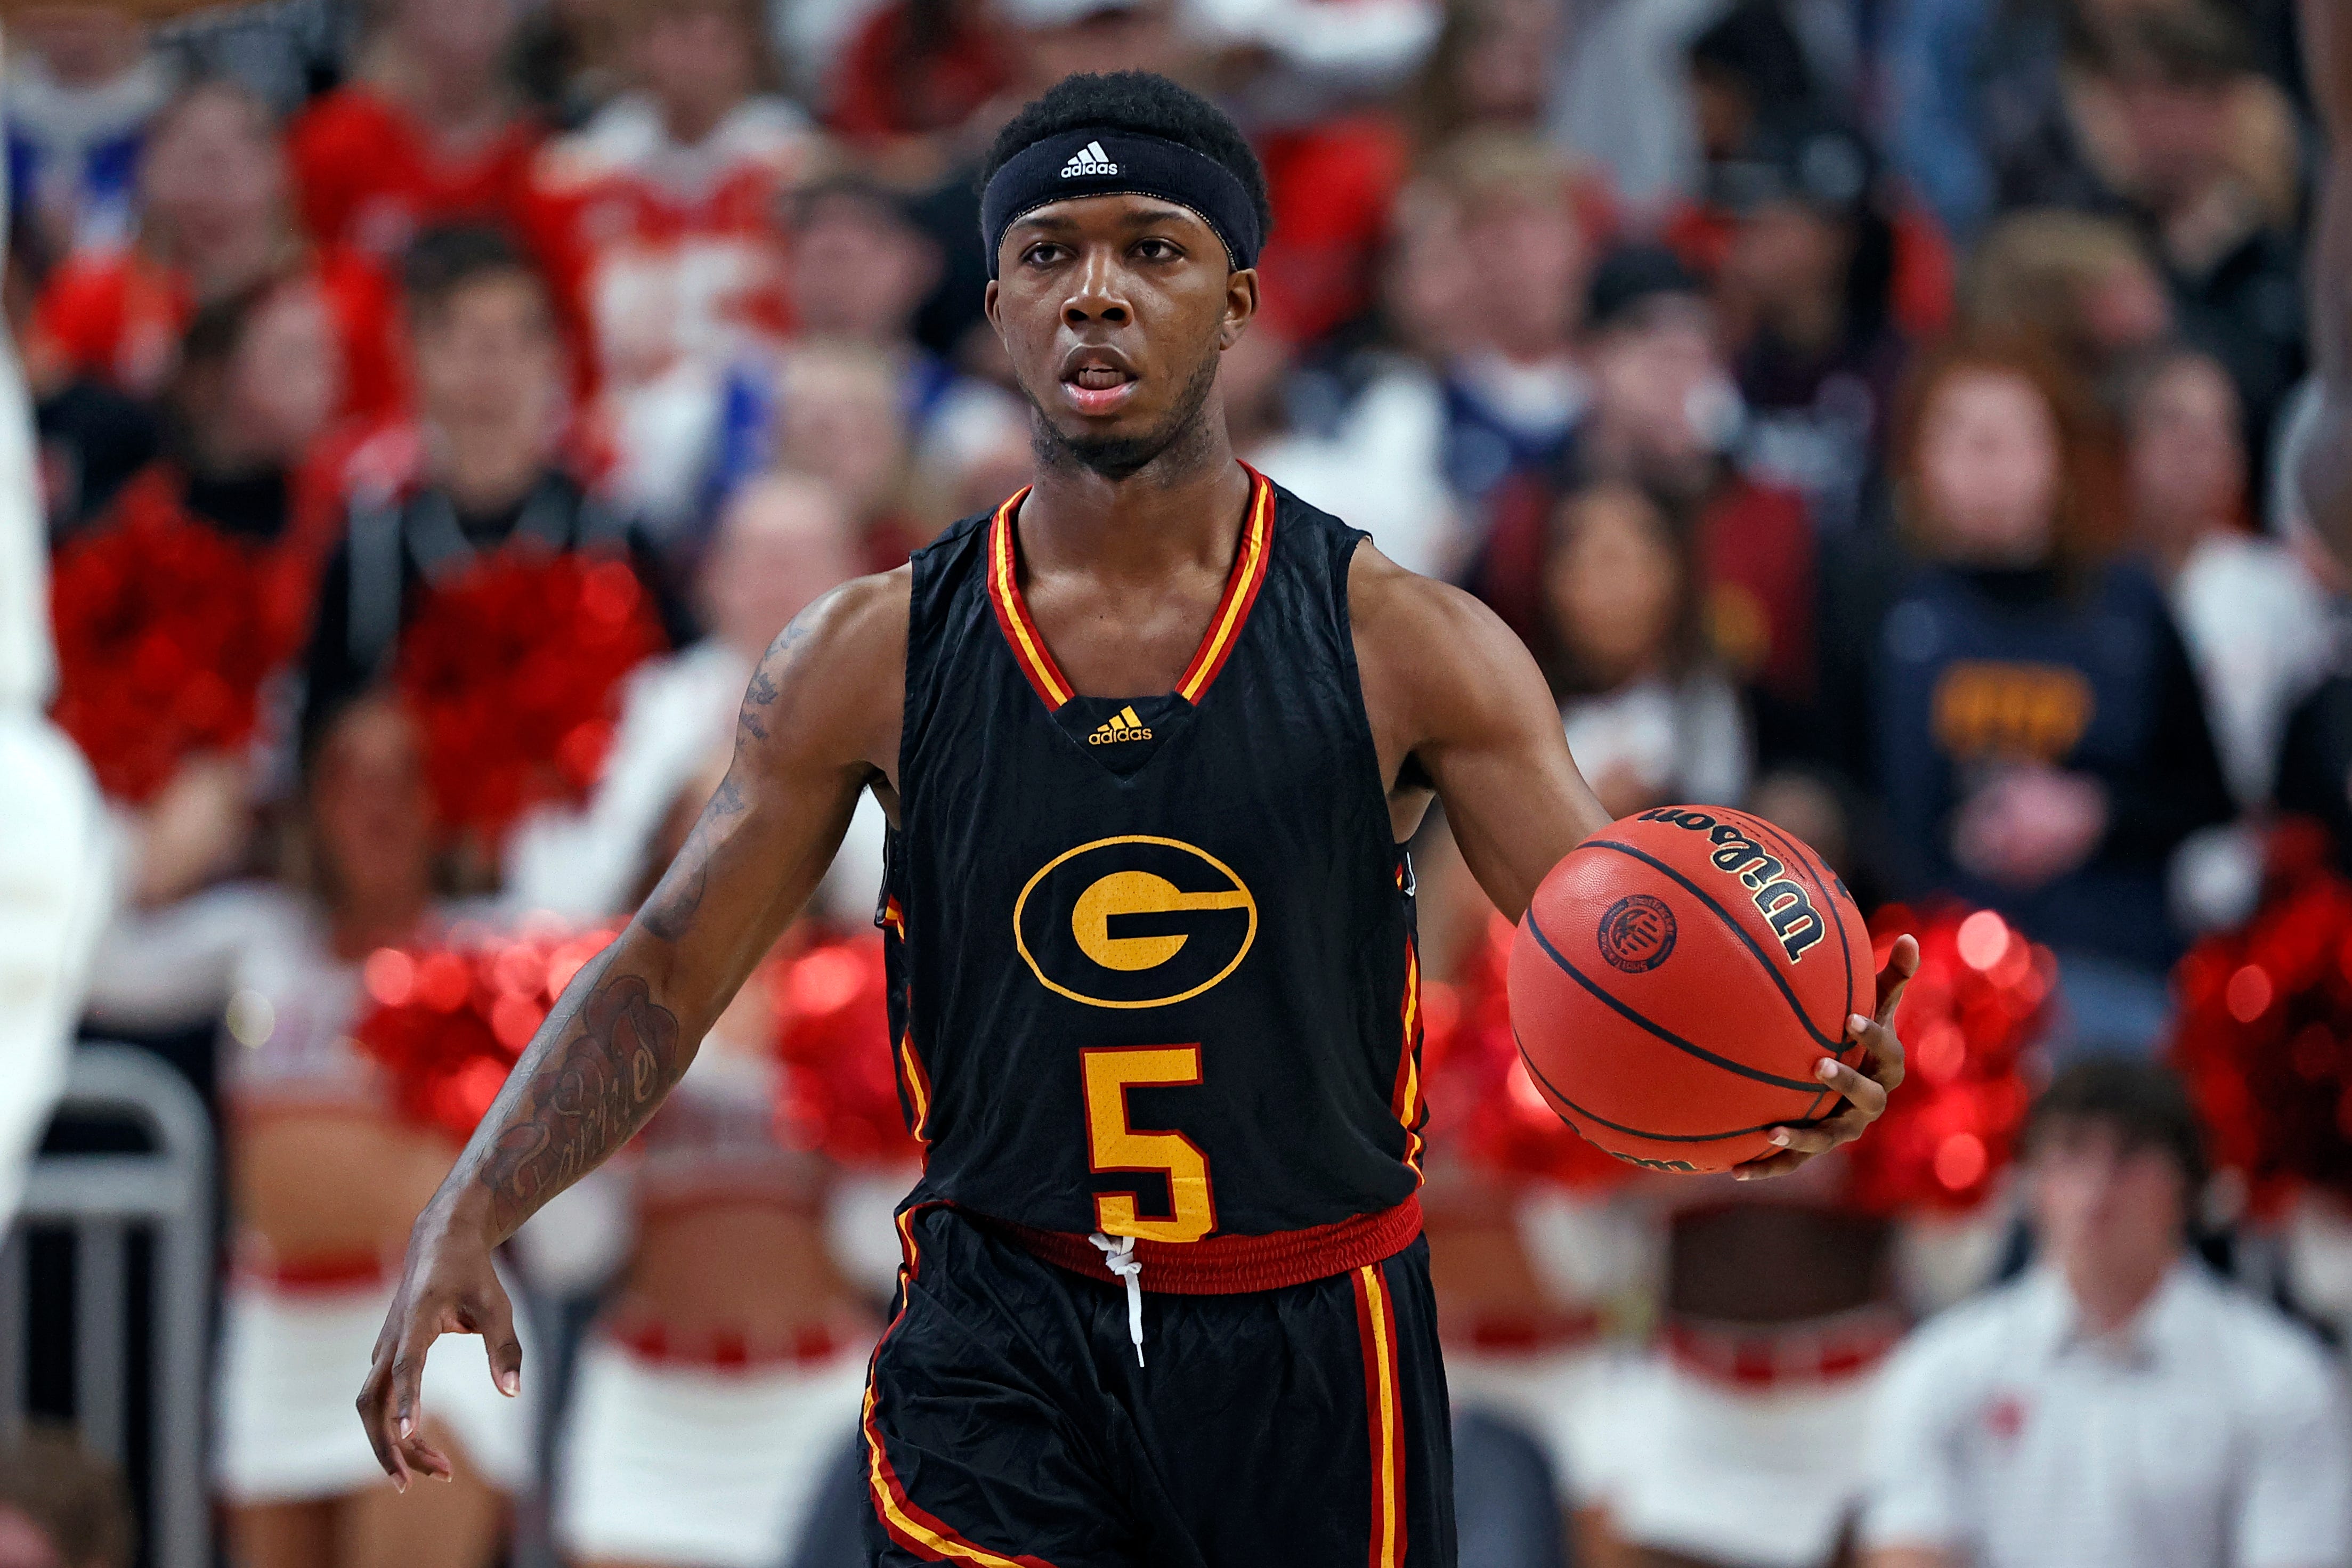 How to watch Grambling State vs. Iowa State basketball on live stream